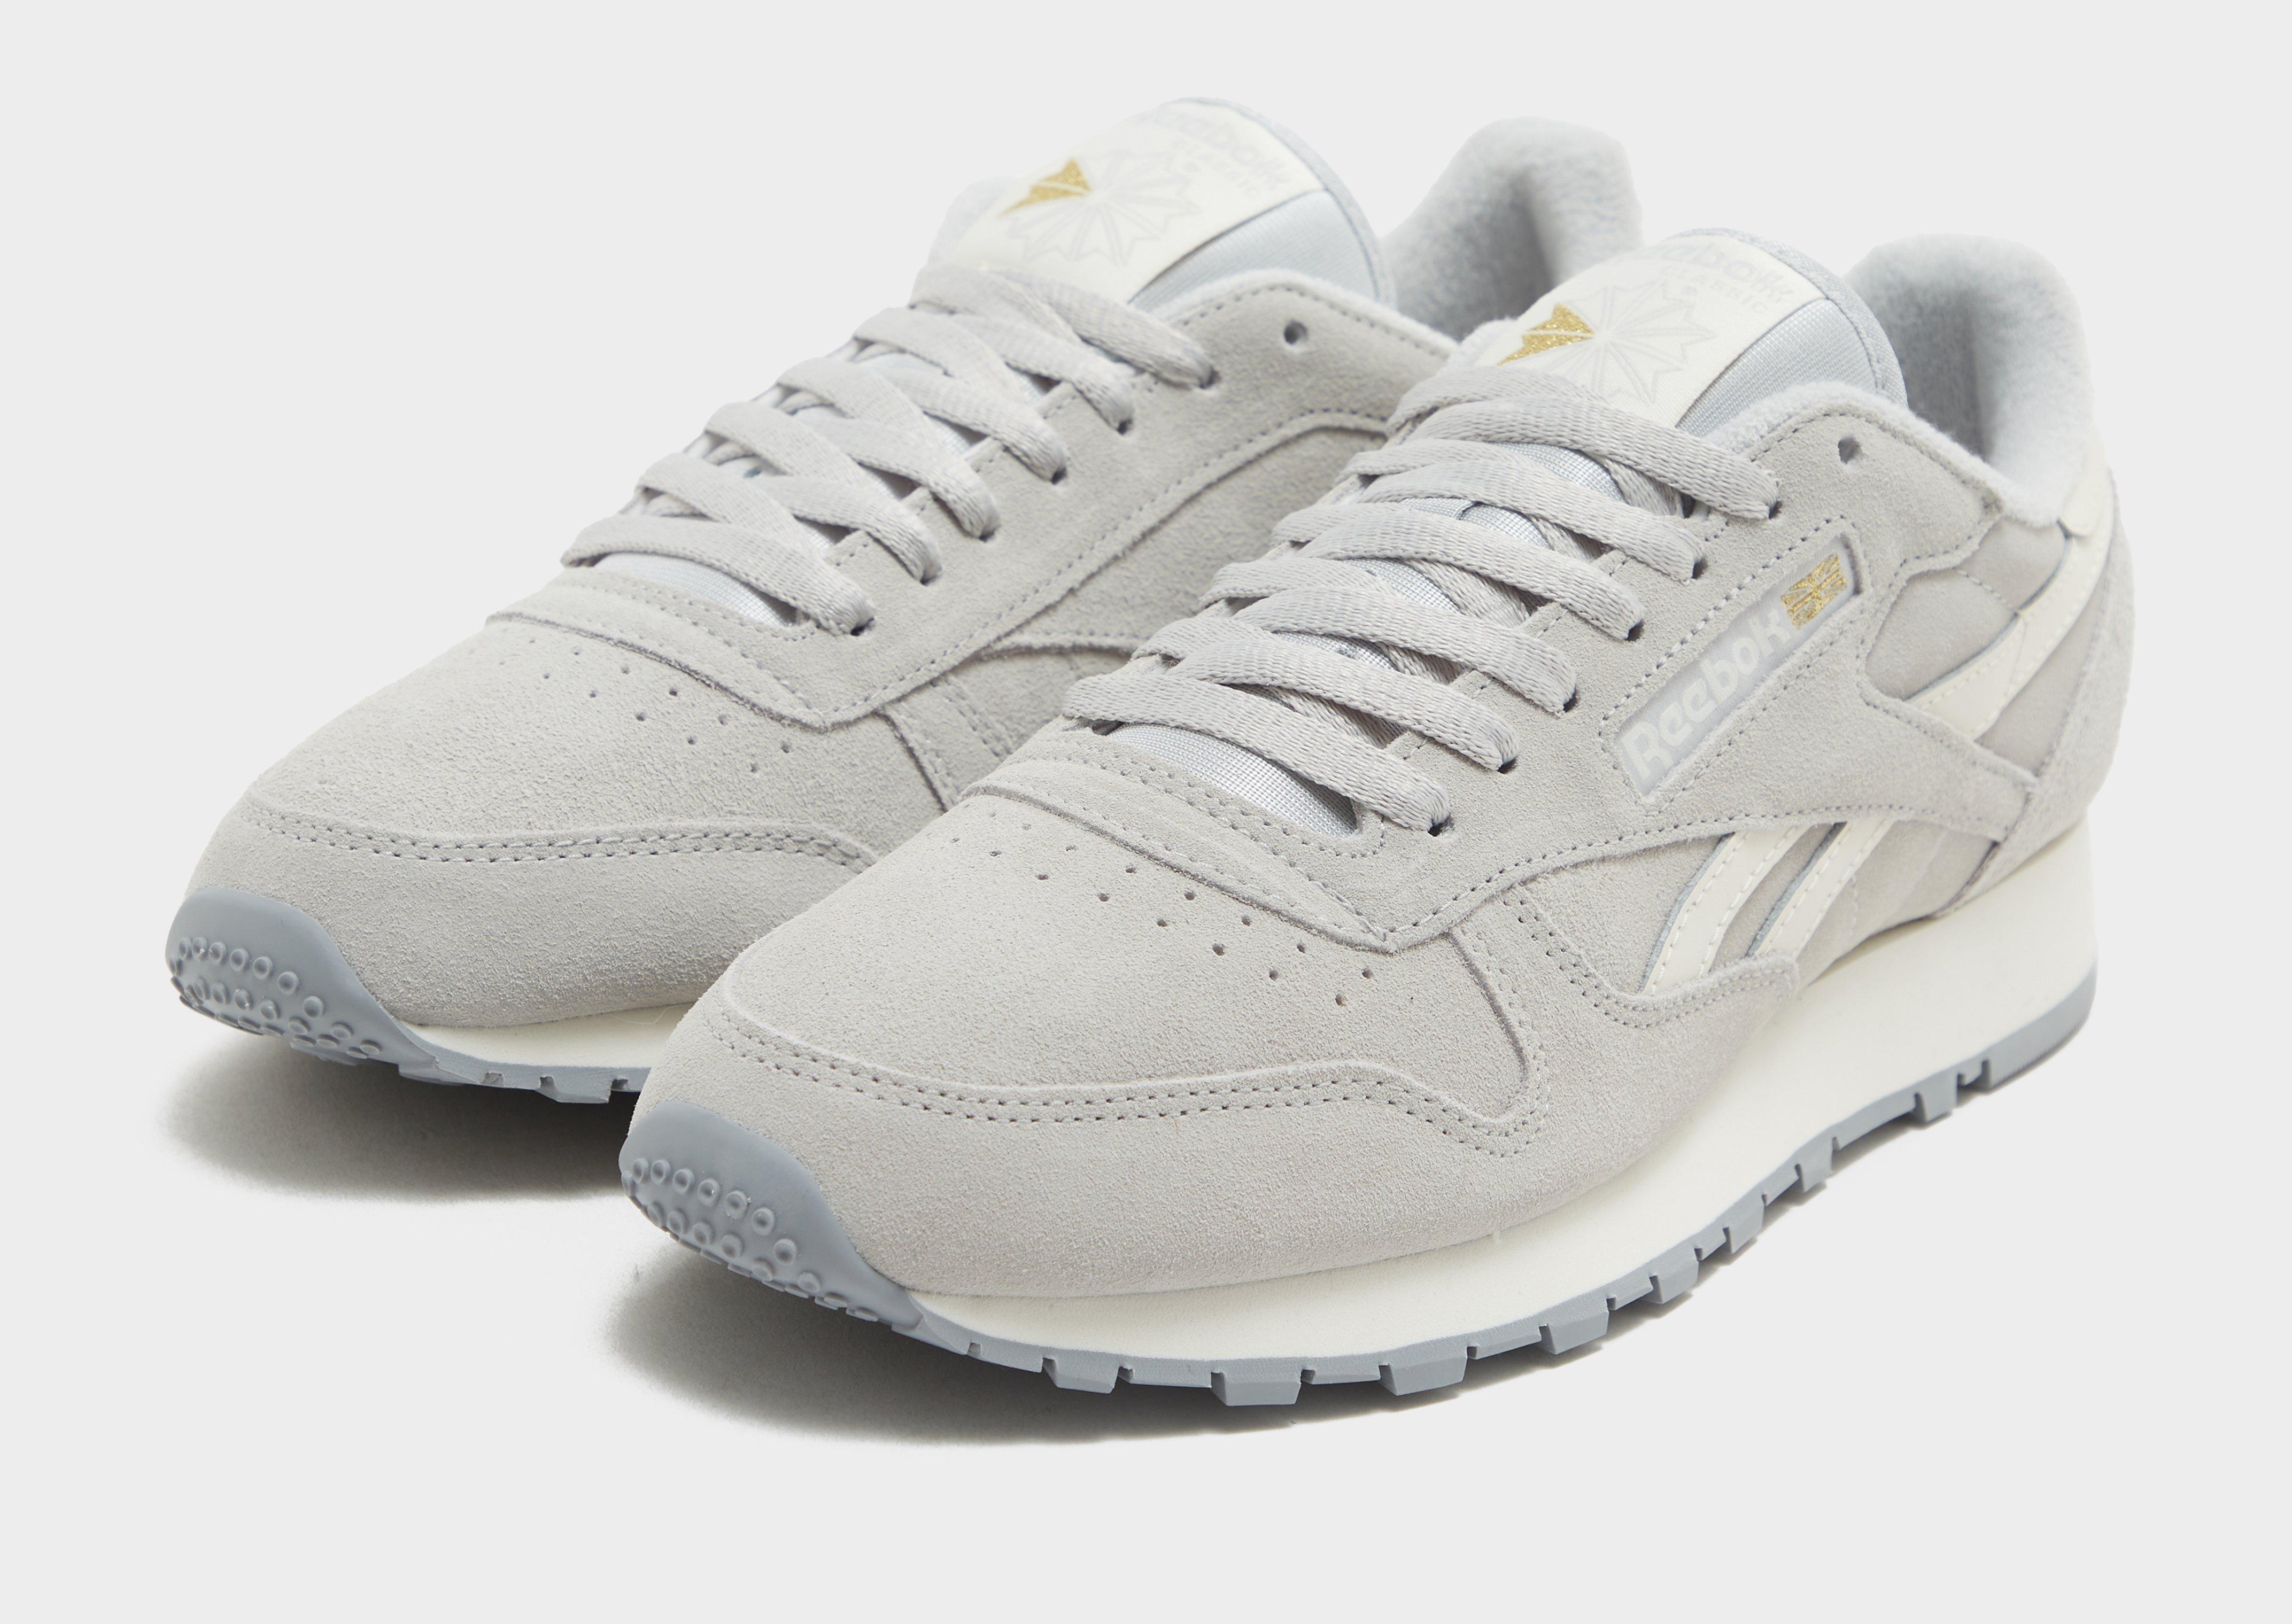 Zapatilla Reebok Classic Leather Ree:Dux Mujer Gris